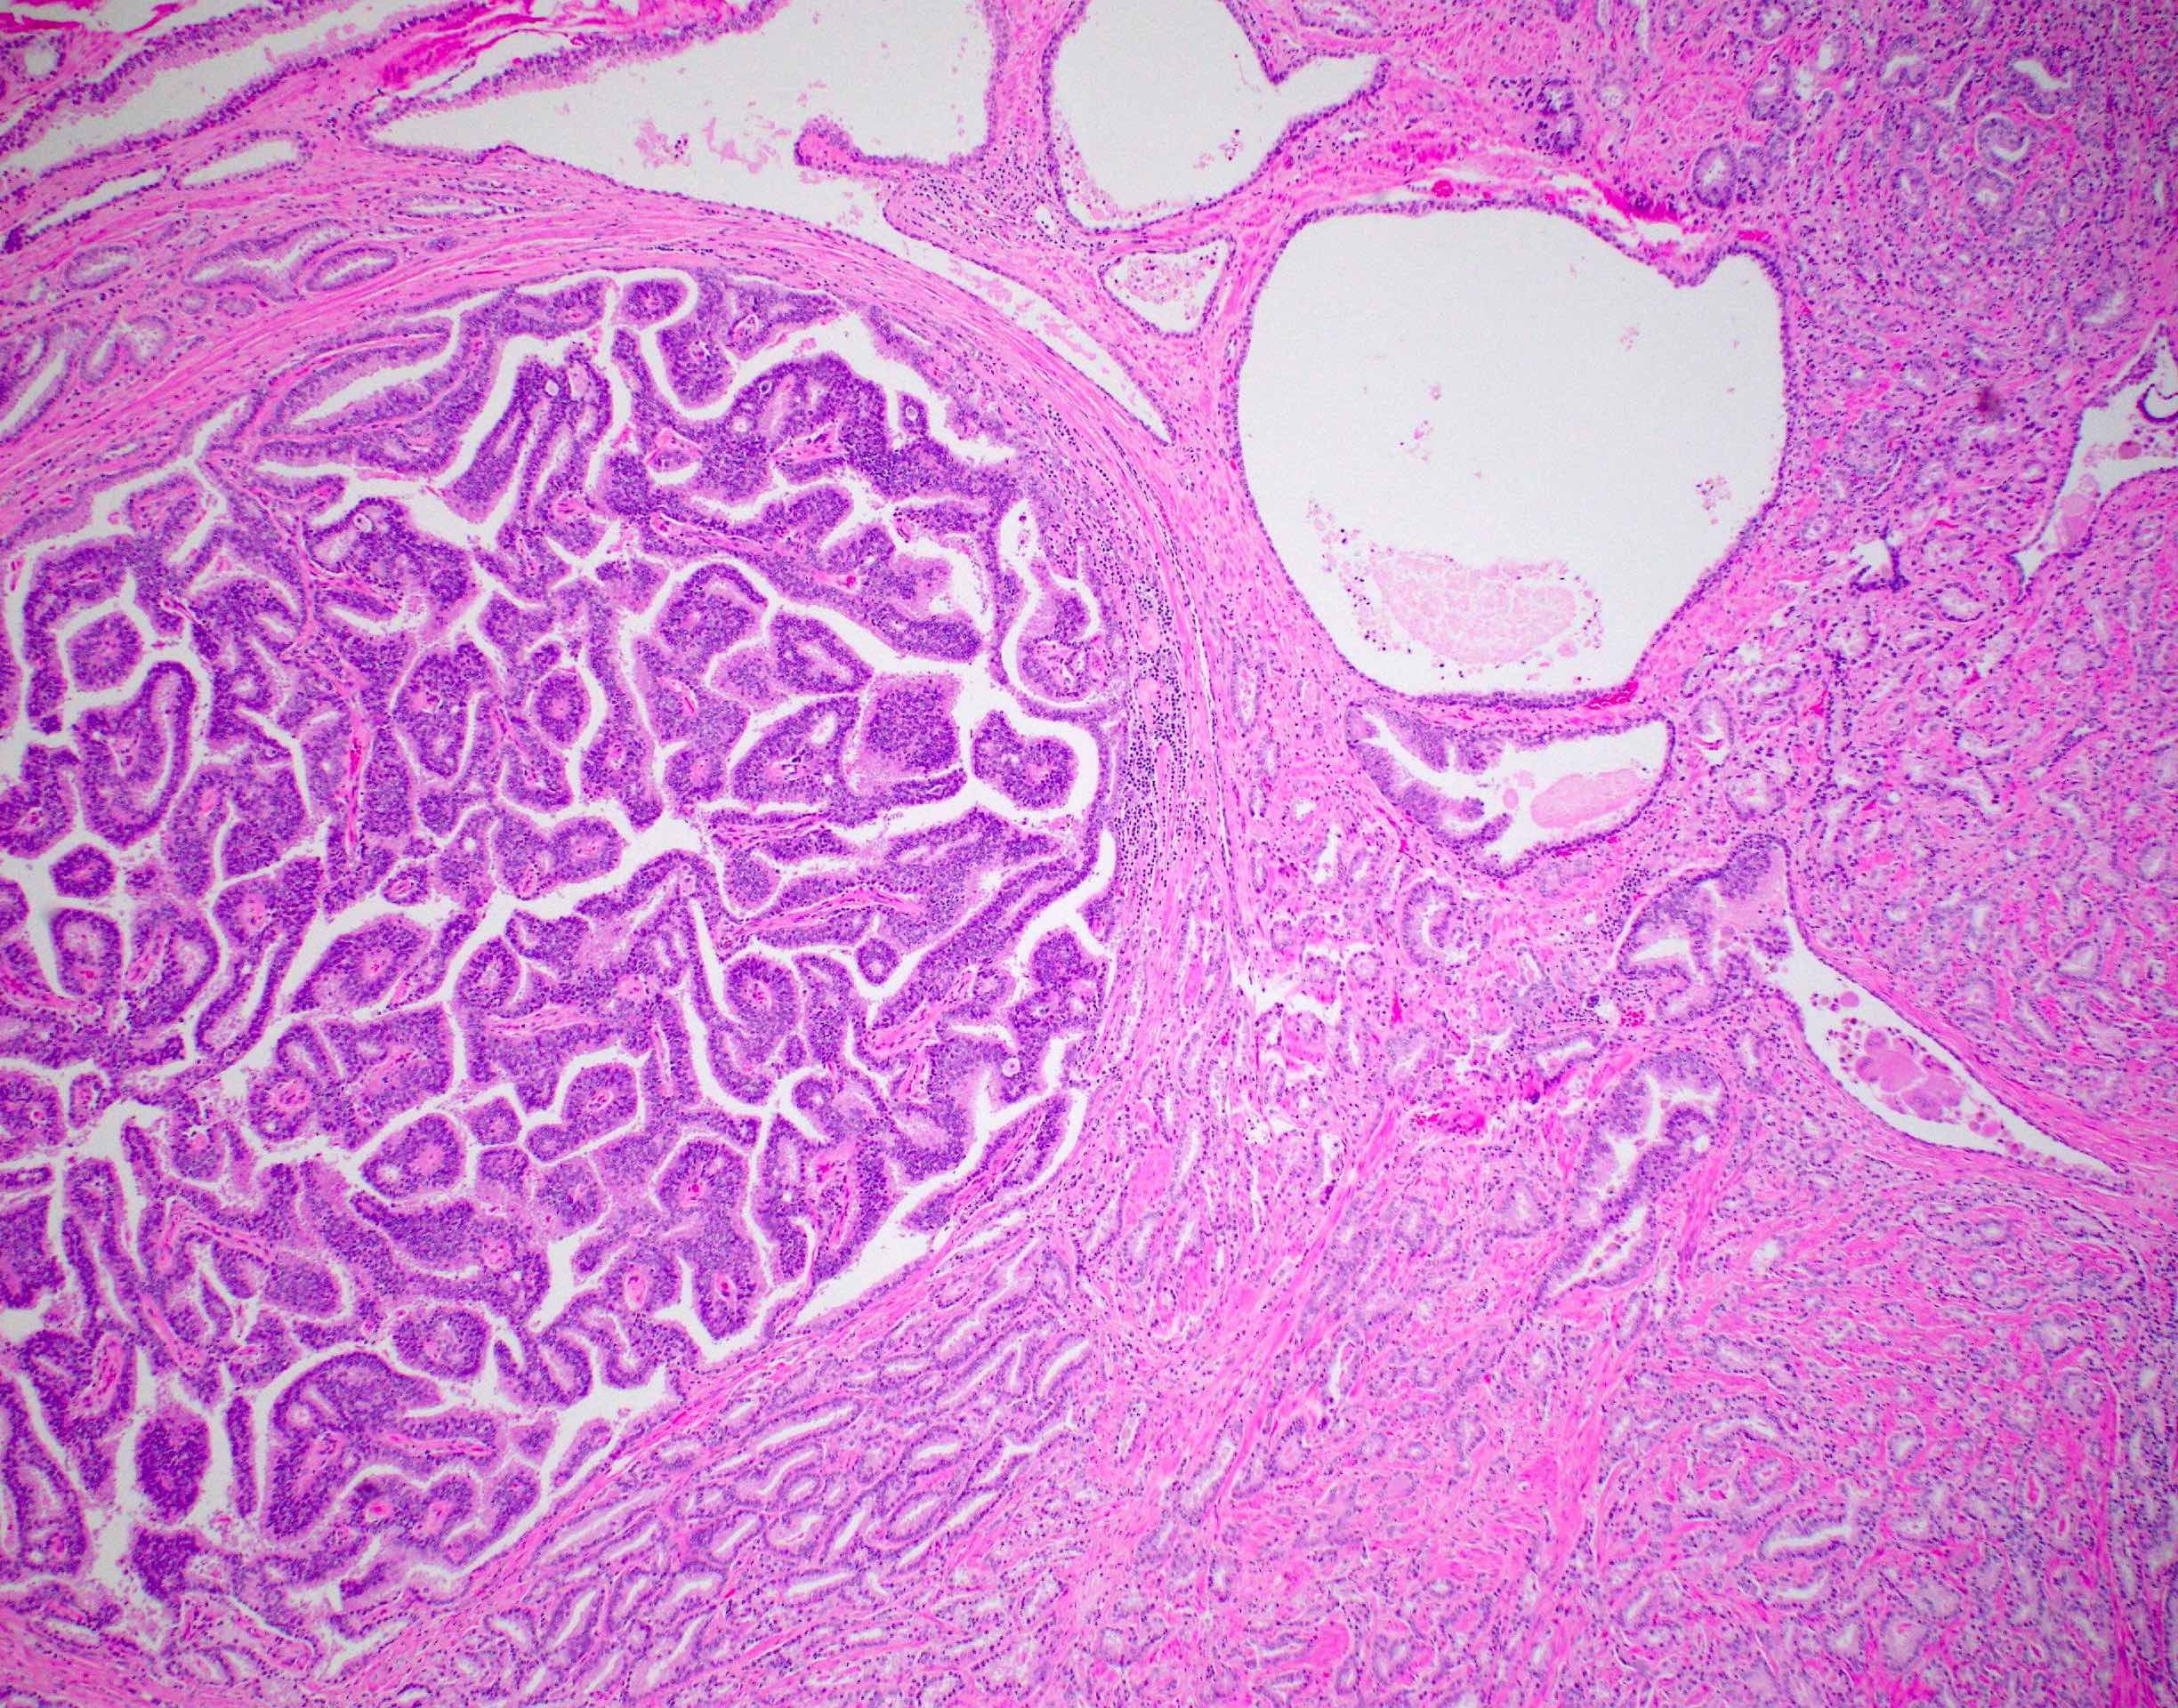 Mixed acinar and ductal adenocarcinoma